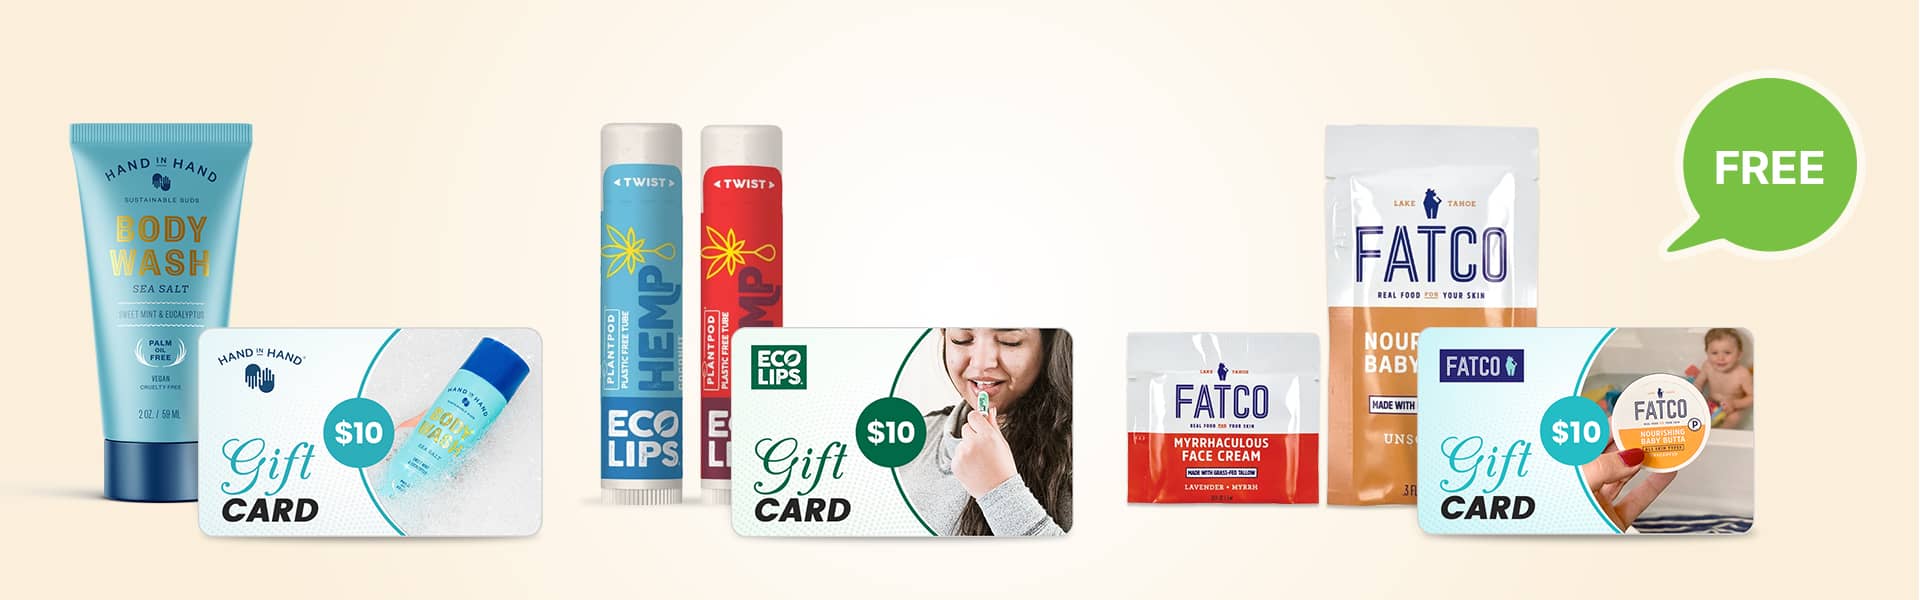 FREE Natural Beauty Products from Hand in Hand Eco Lips and FATCO Just Pay Shipping Closetsamples